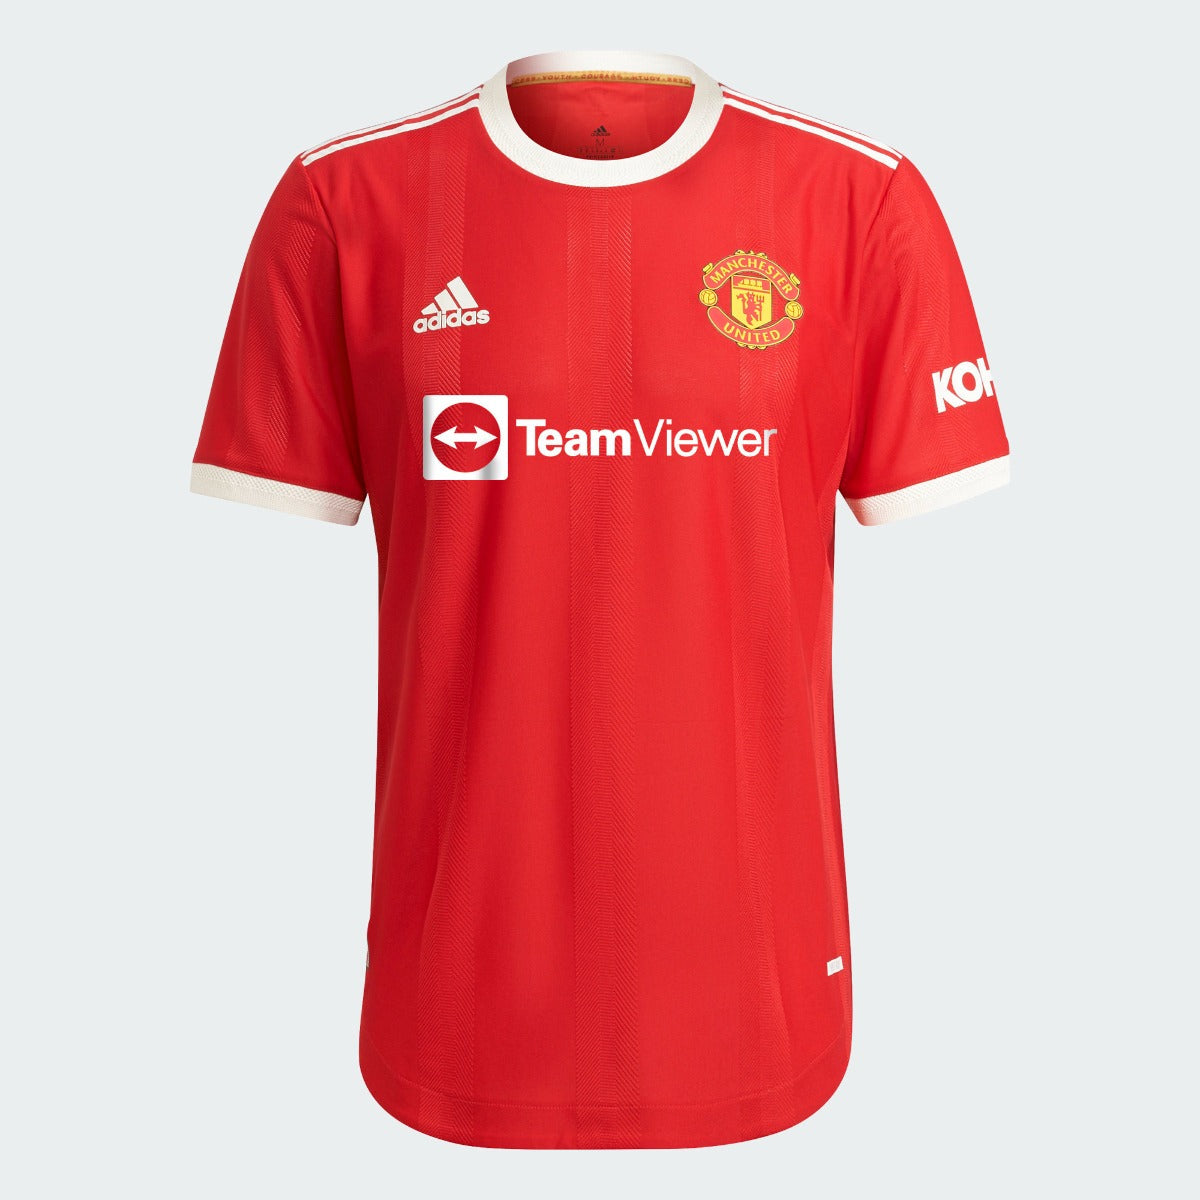 Adidas 2021-22 Manchester United Authentic Home jersey - Red-White